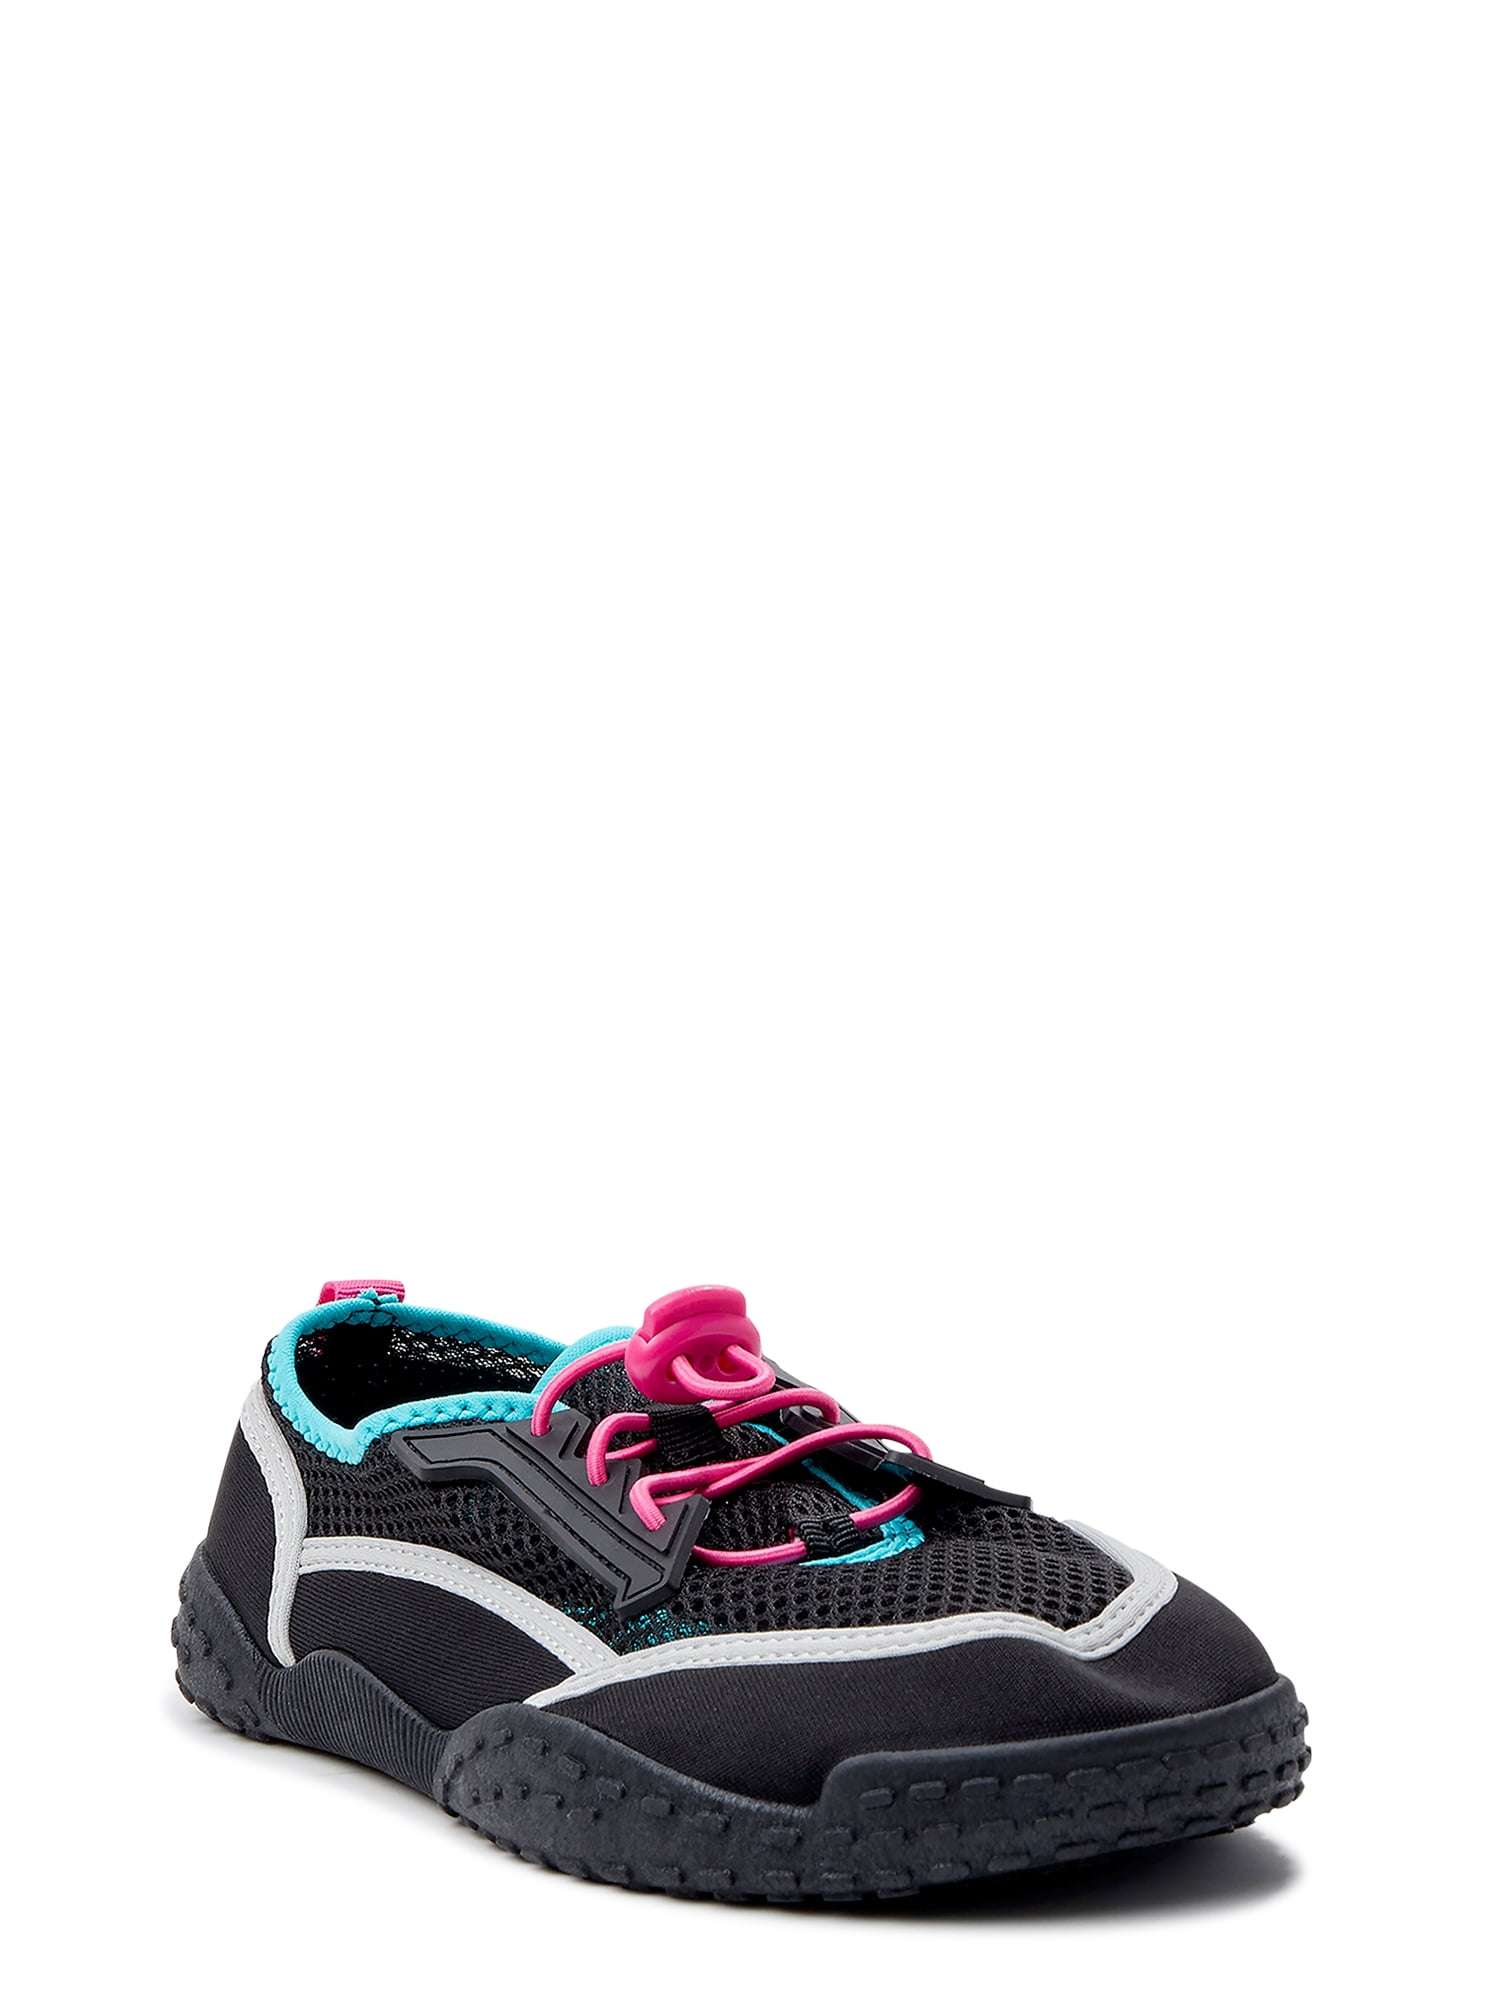 Athletic Works Women's Bungee Water Shoes